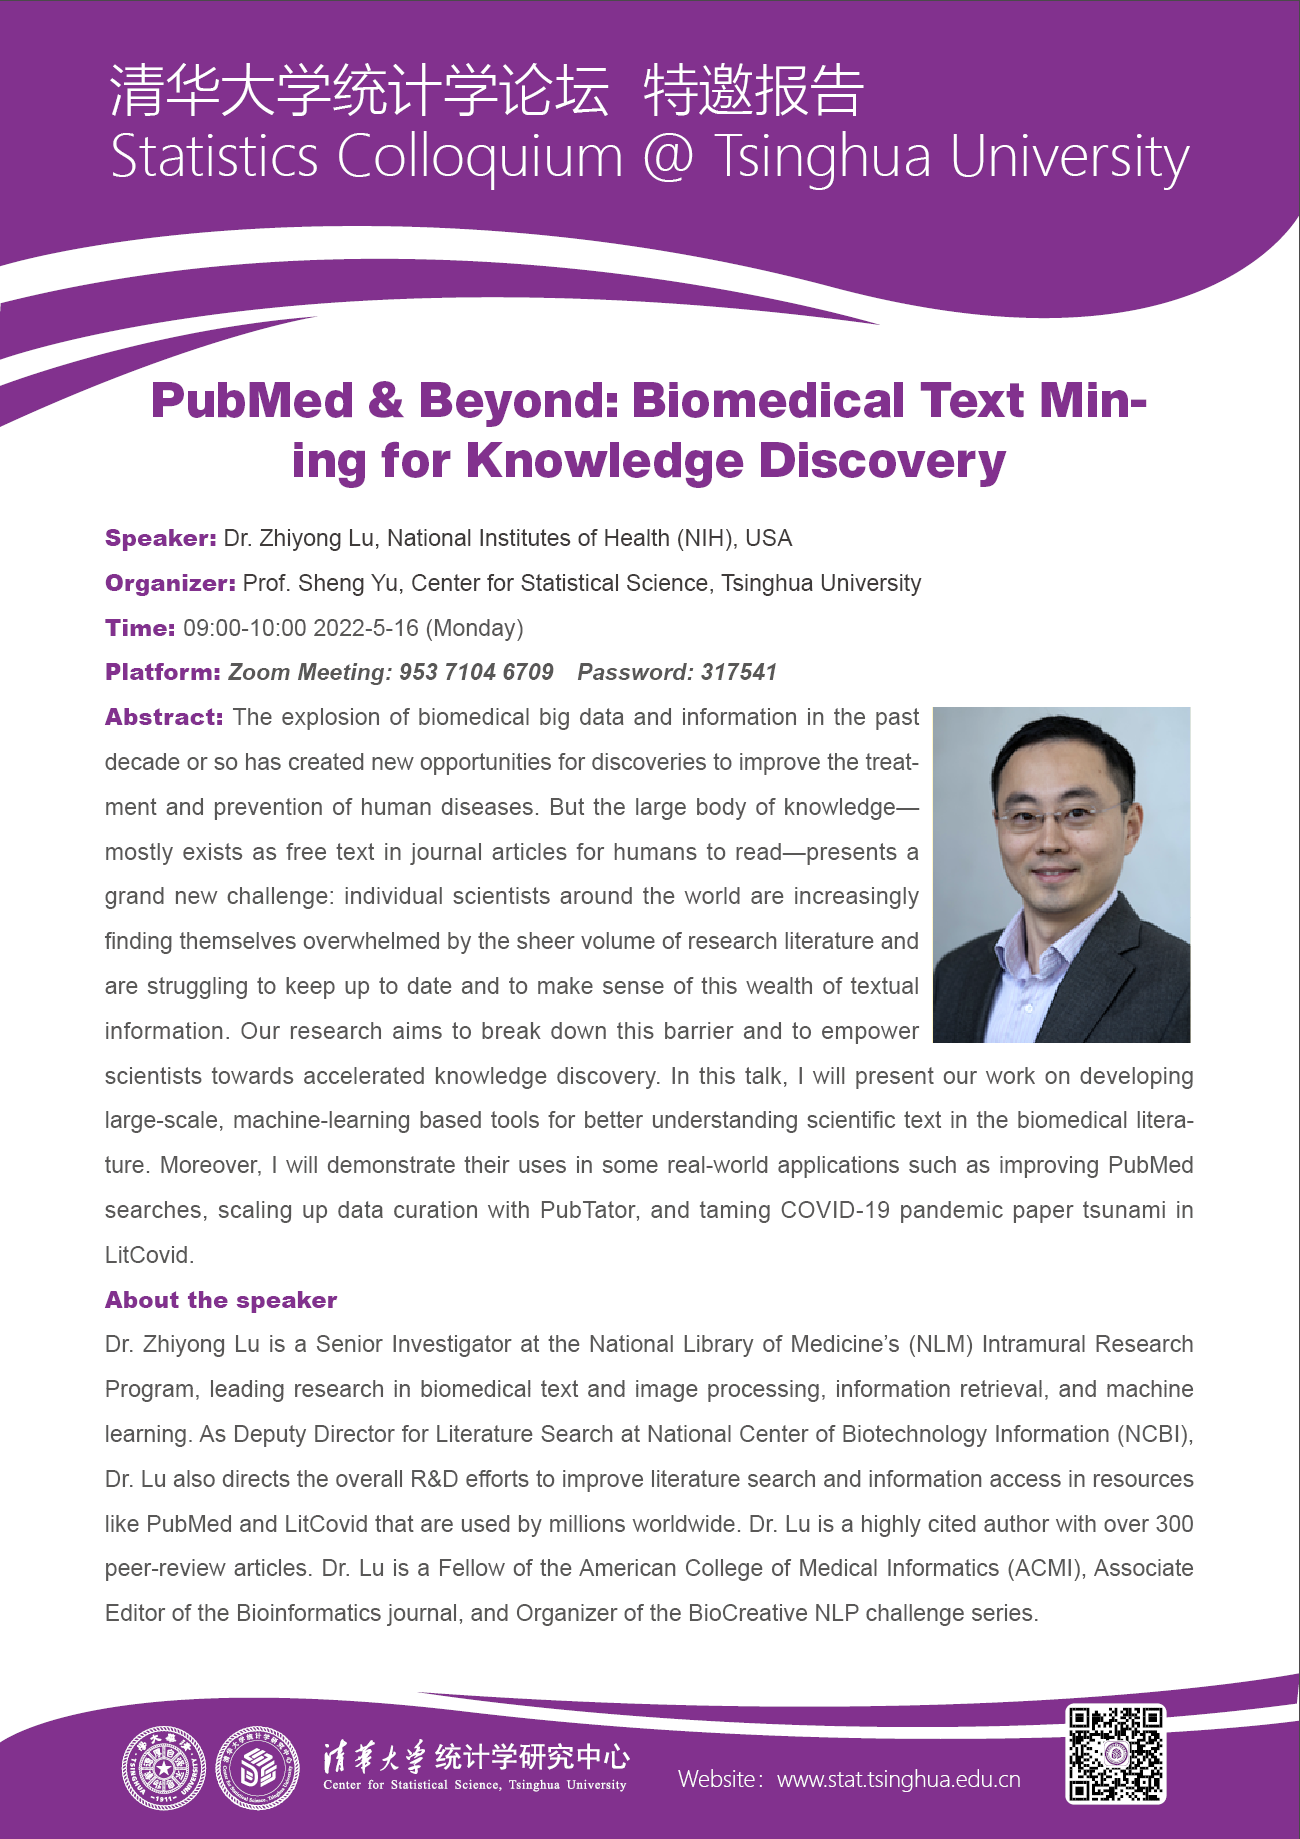 PubMed & Beyond: Biomedical Text Mining for Knowledge Discovery